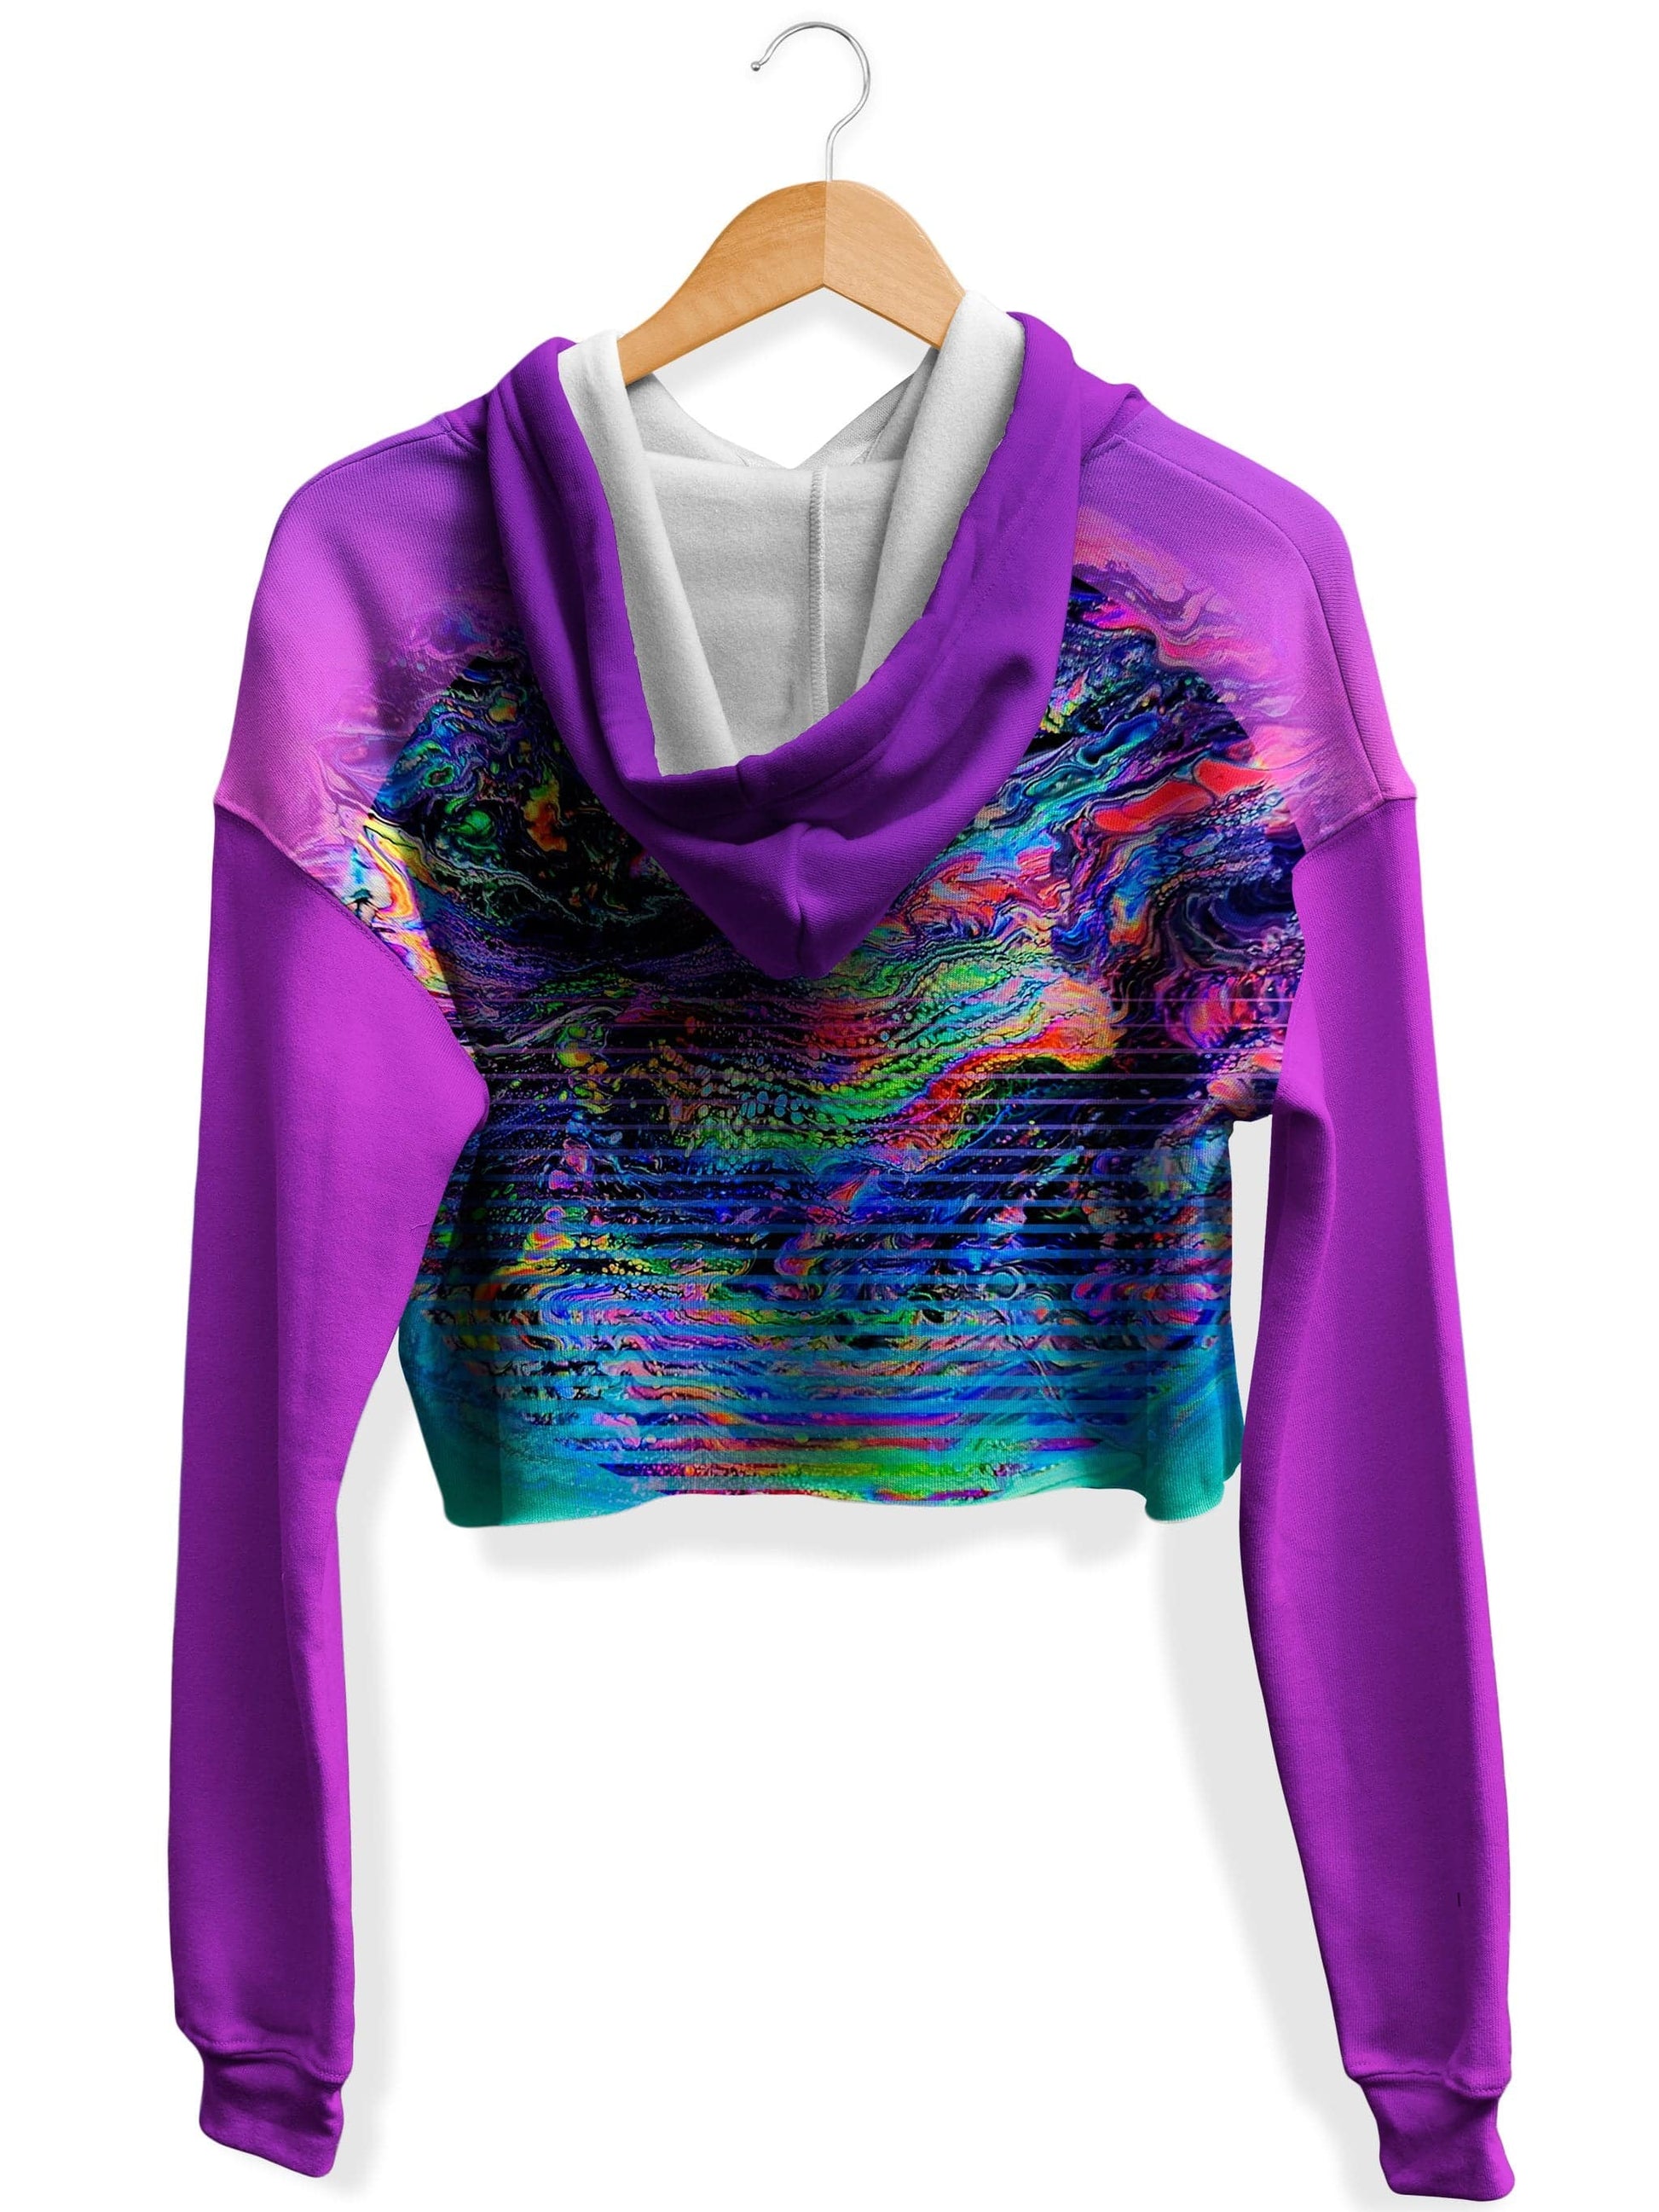 Psychedelic Outrun Fleece Crop Hoodie, Psychedelic Pourhouse, | iEDM